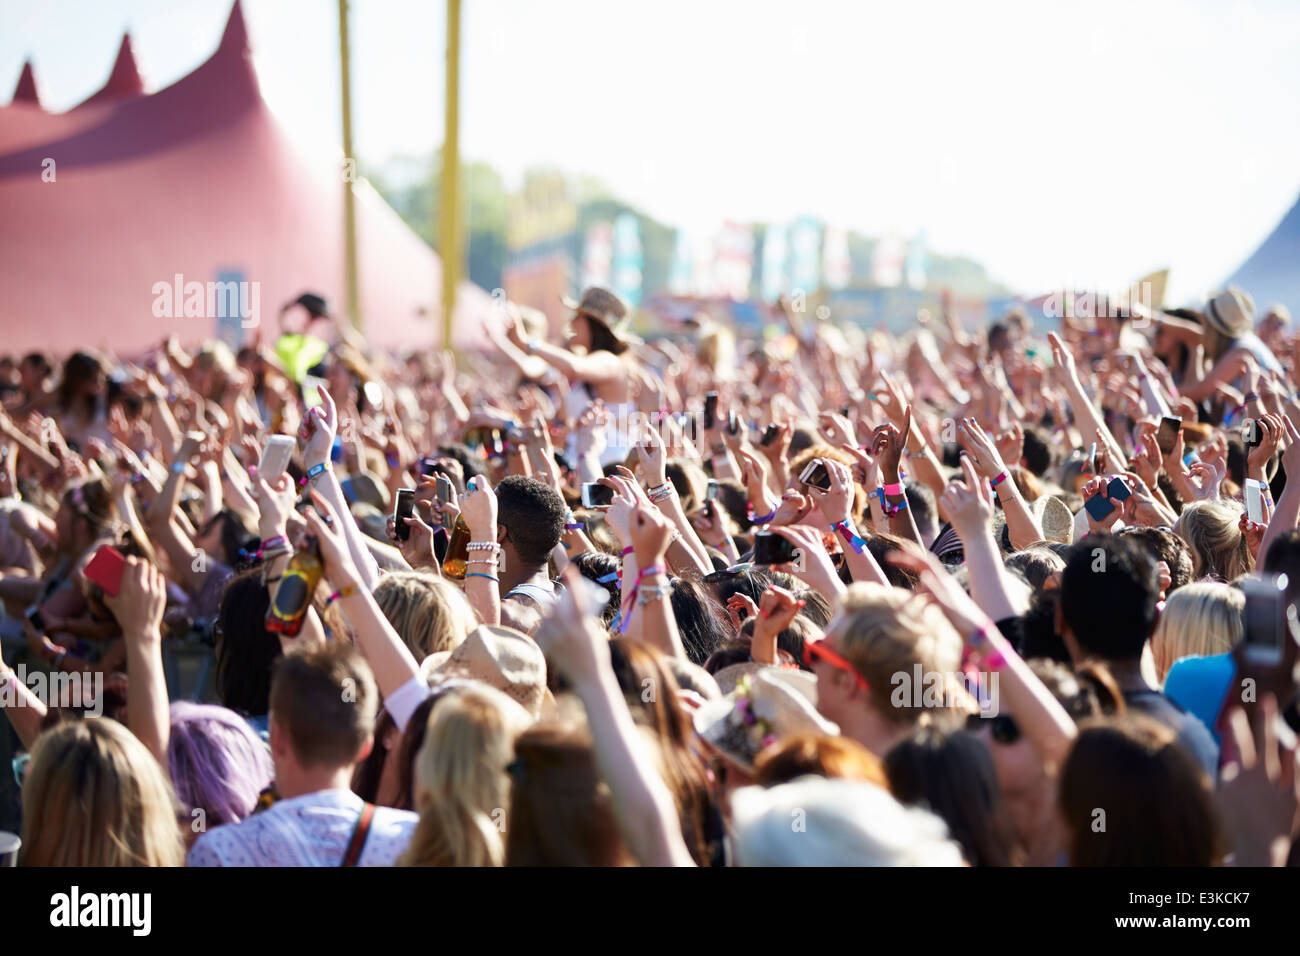 Crowds Enjoying Themselves At Outdoor Music Festival Stock Photo